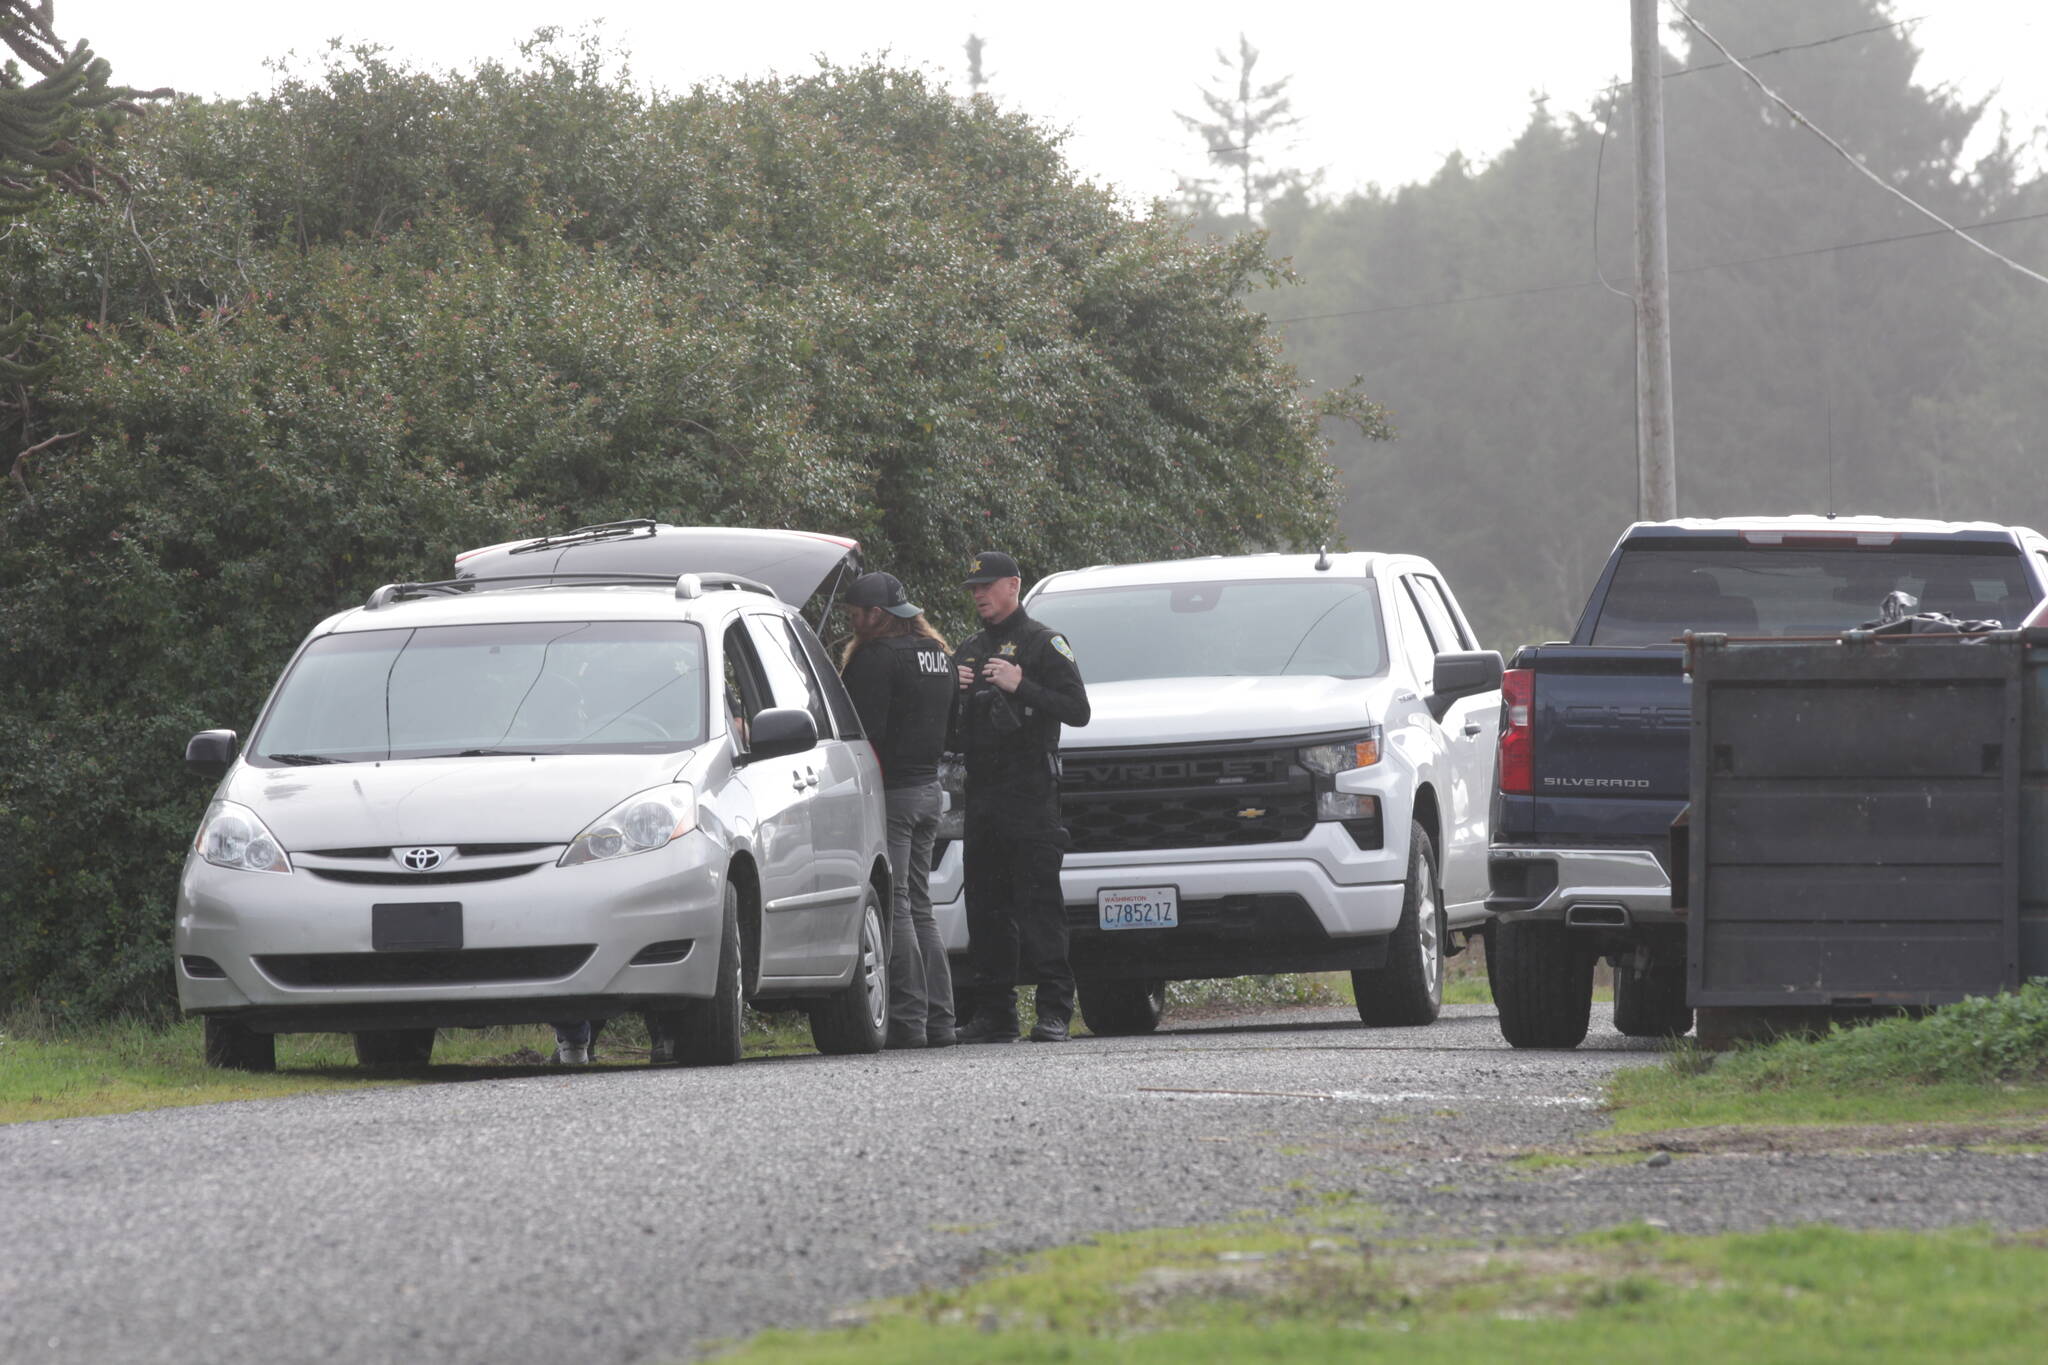 Personnel from the Grays Harbor Sheriff’s Office talk to local residents seeking more information following a shooting in Moclips on Nov. 6. (Michael S. Lockett / The Daily World)